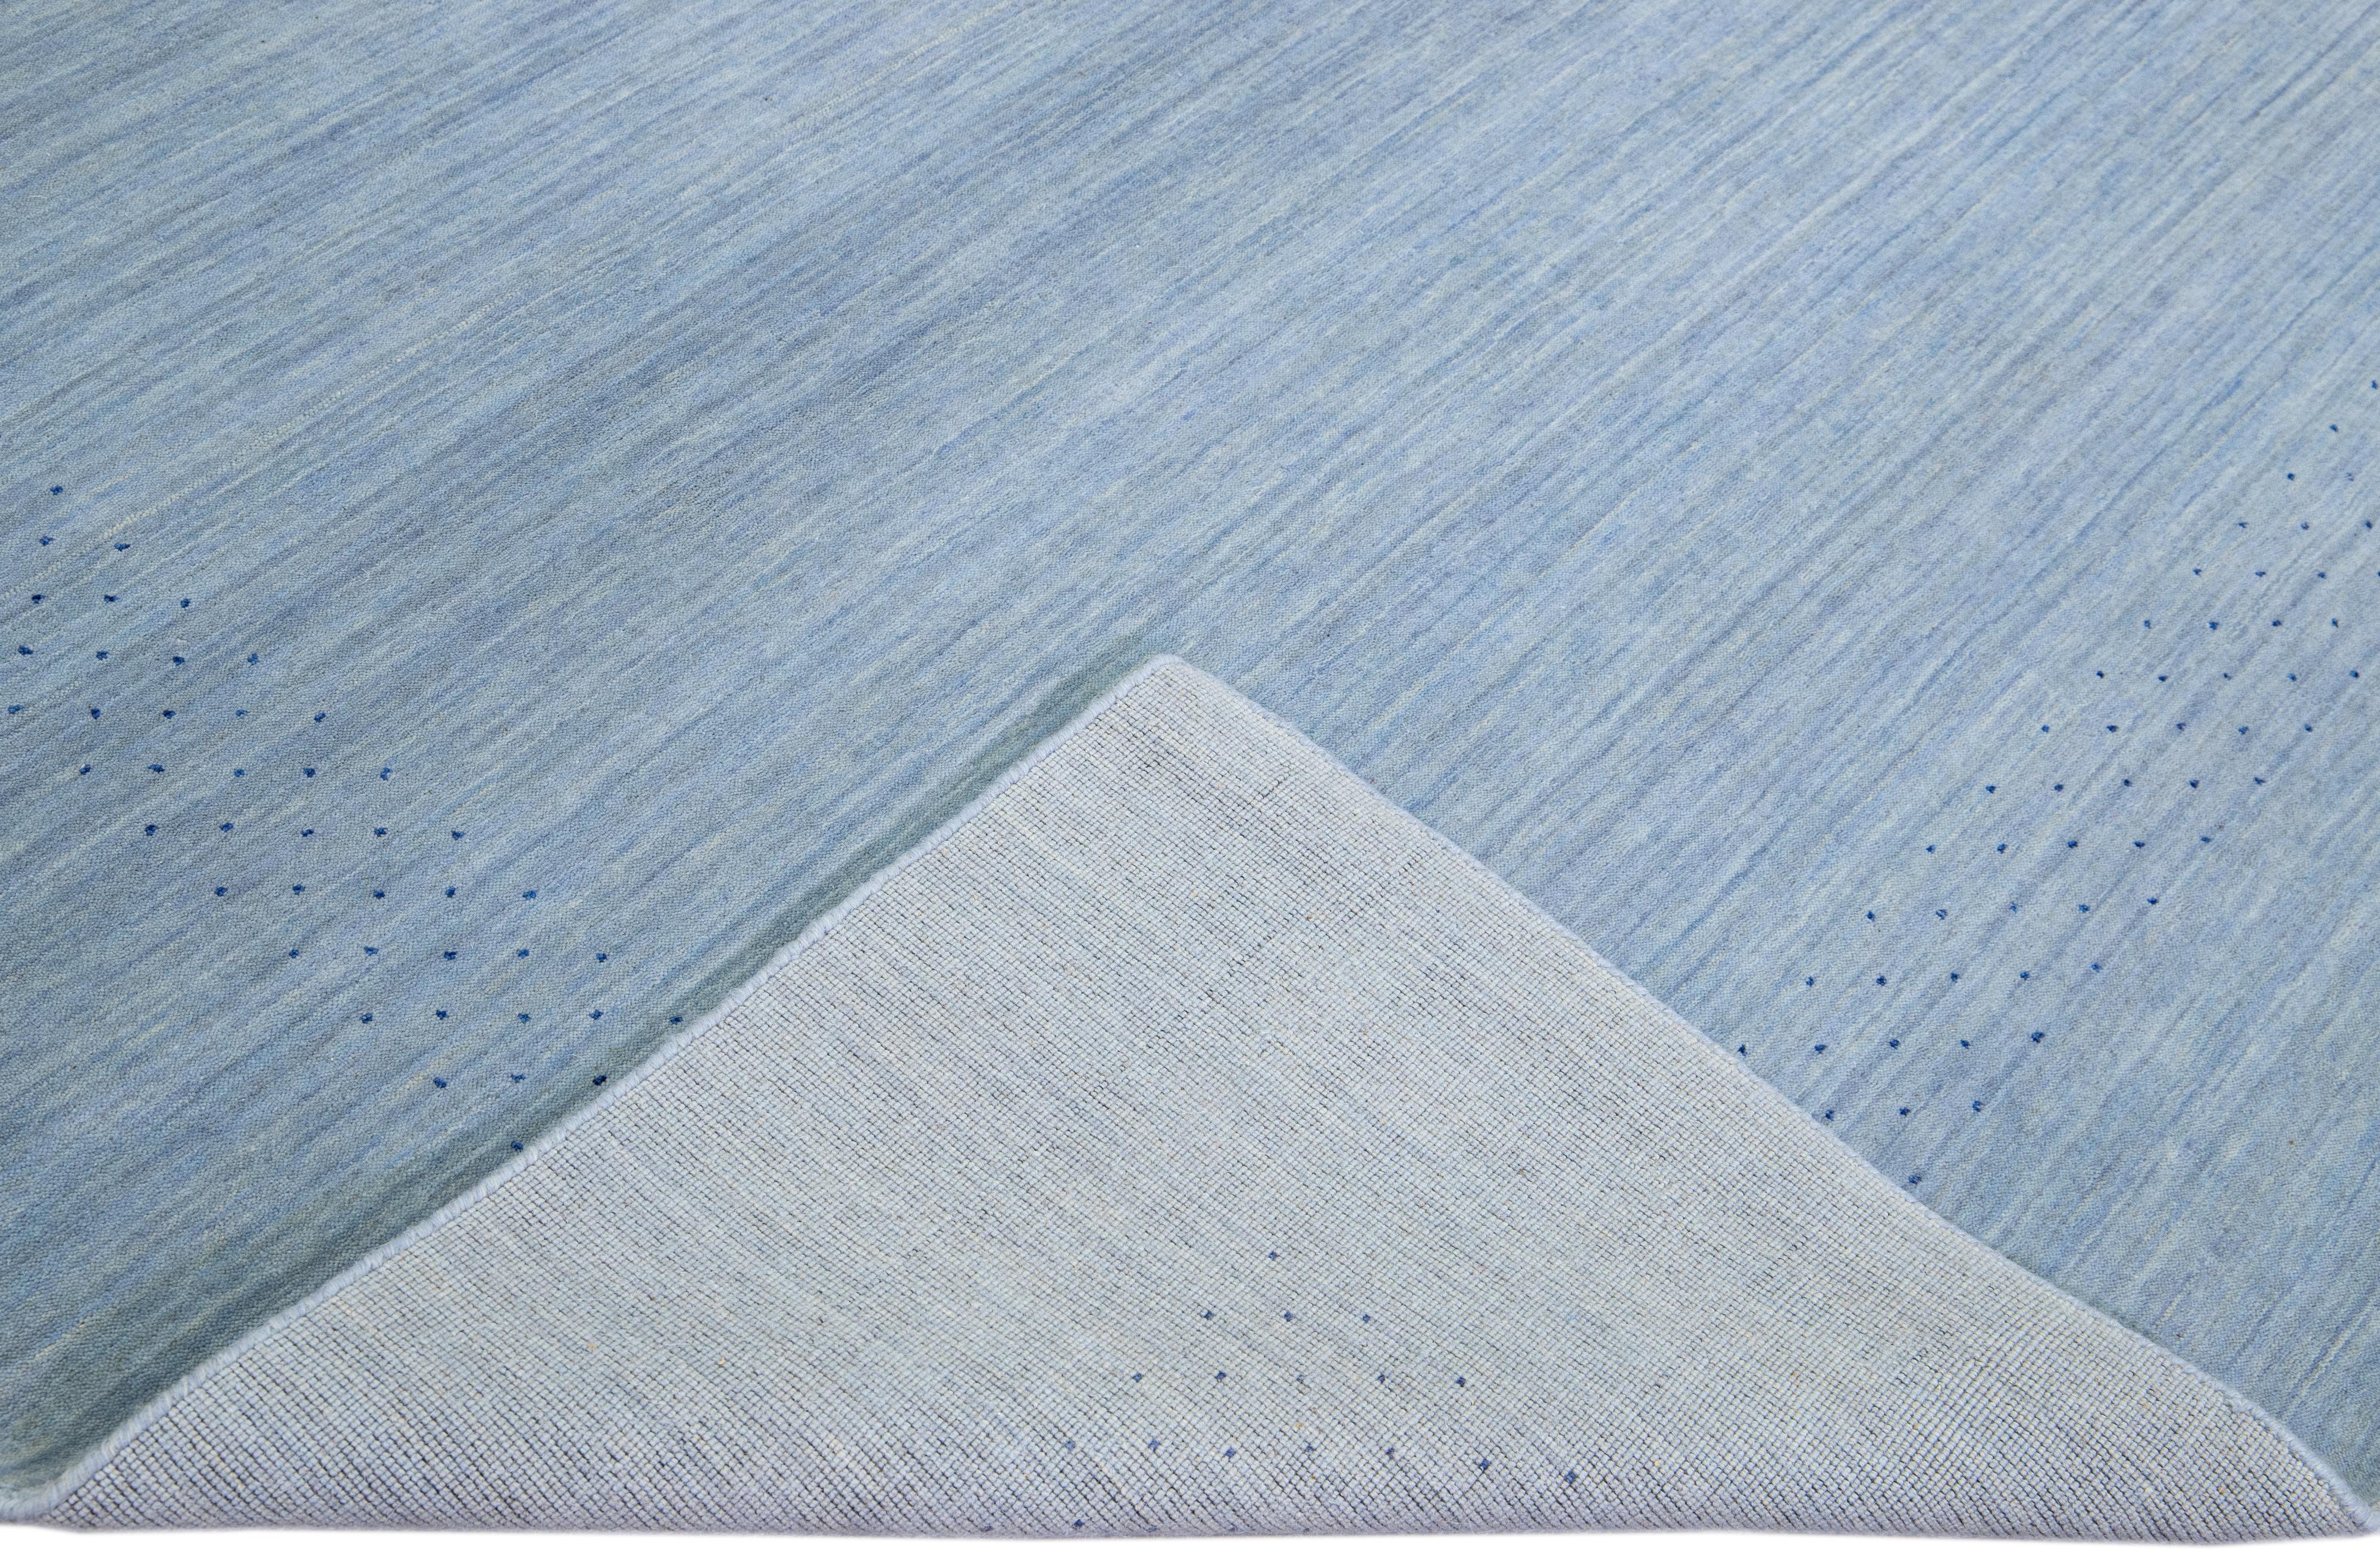 Beautiful modern Gabbeh style hand-Loom wool rug with a light blue field. This Gabbeh-style rug has gray accents in a gorgeous all-over geometric minimal design.

This rug measures: 9'2